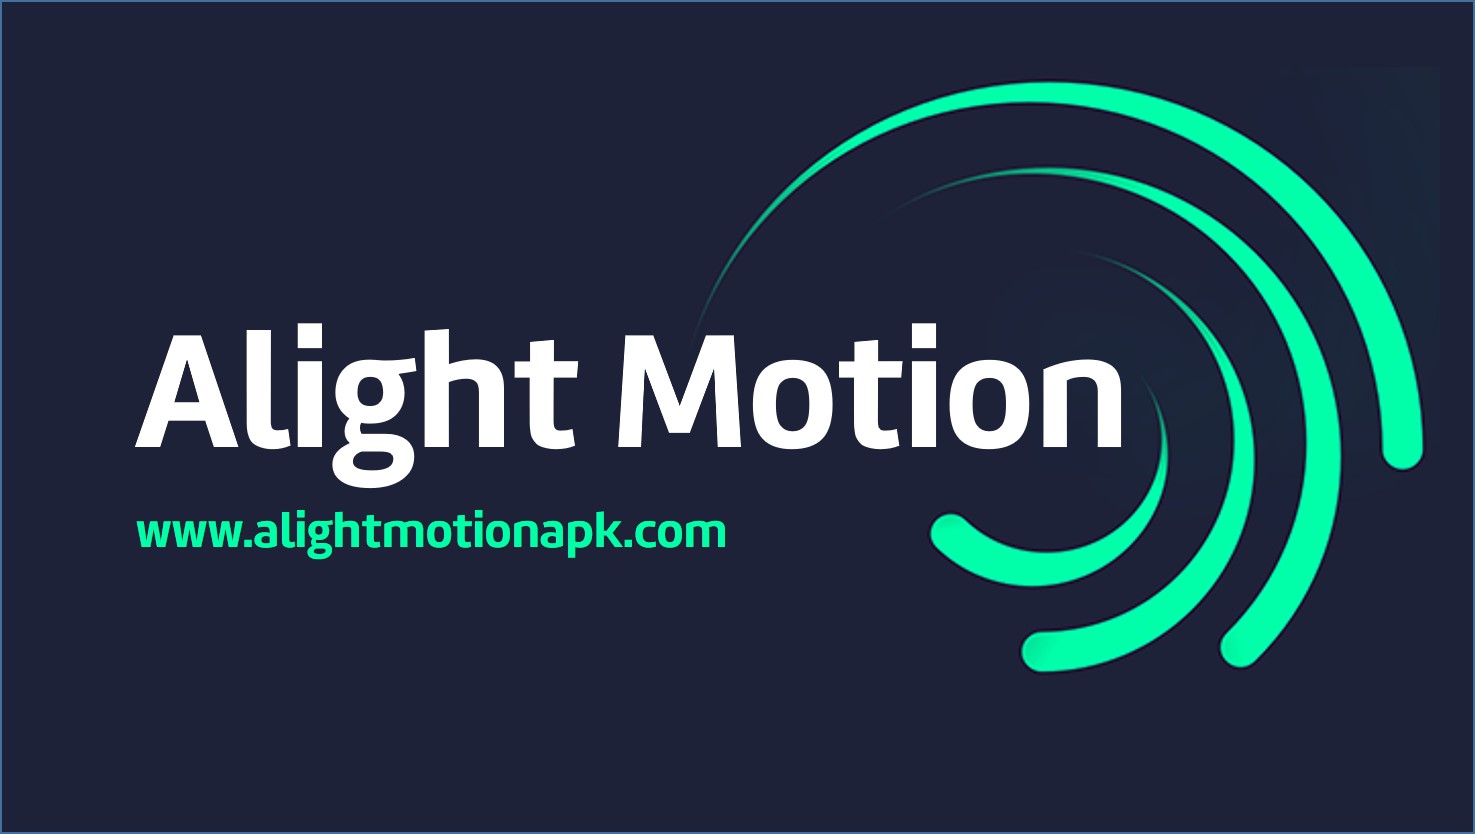 Alight Motion Apk 4.4.8 Latest Version Free Download Android, Ios, Pc